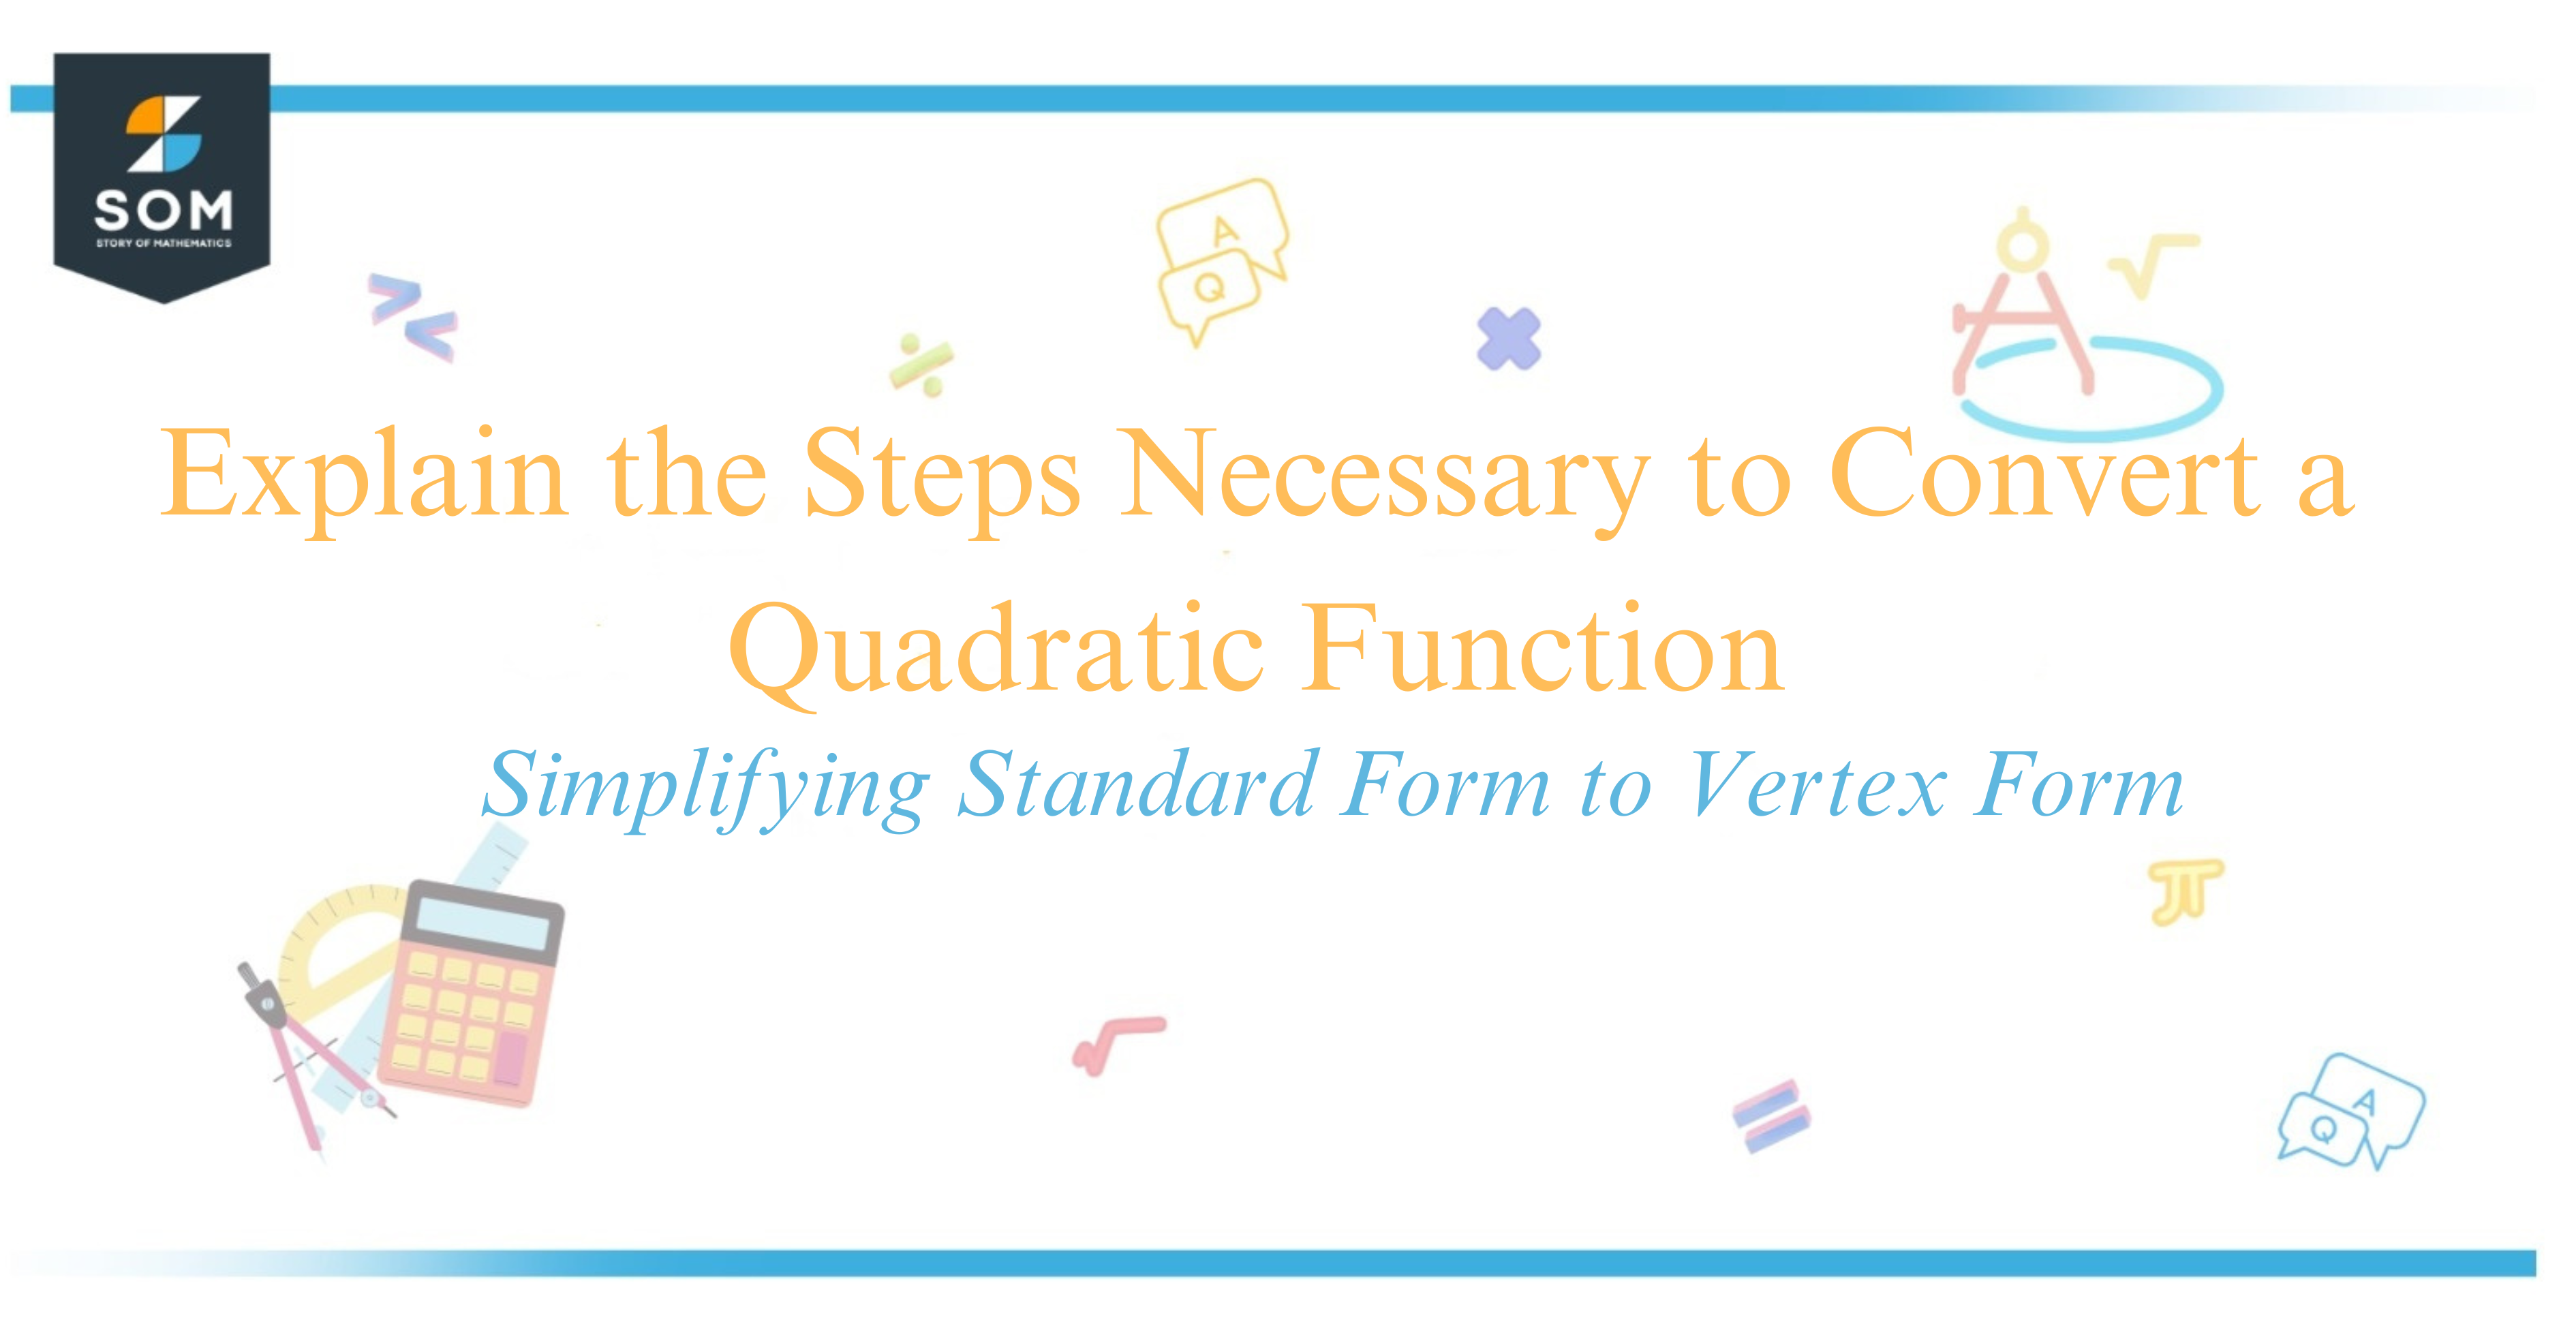 Explain the Steps Necessary to Convert a Quadratic Function Simplifying Standard Form to Vertex Form